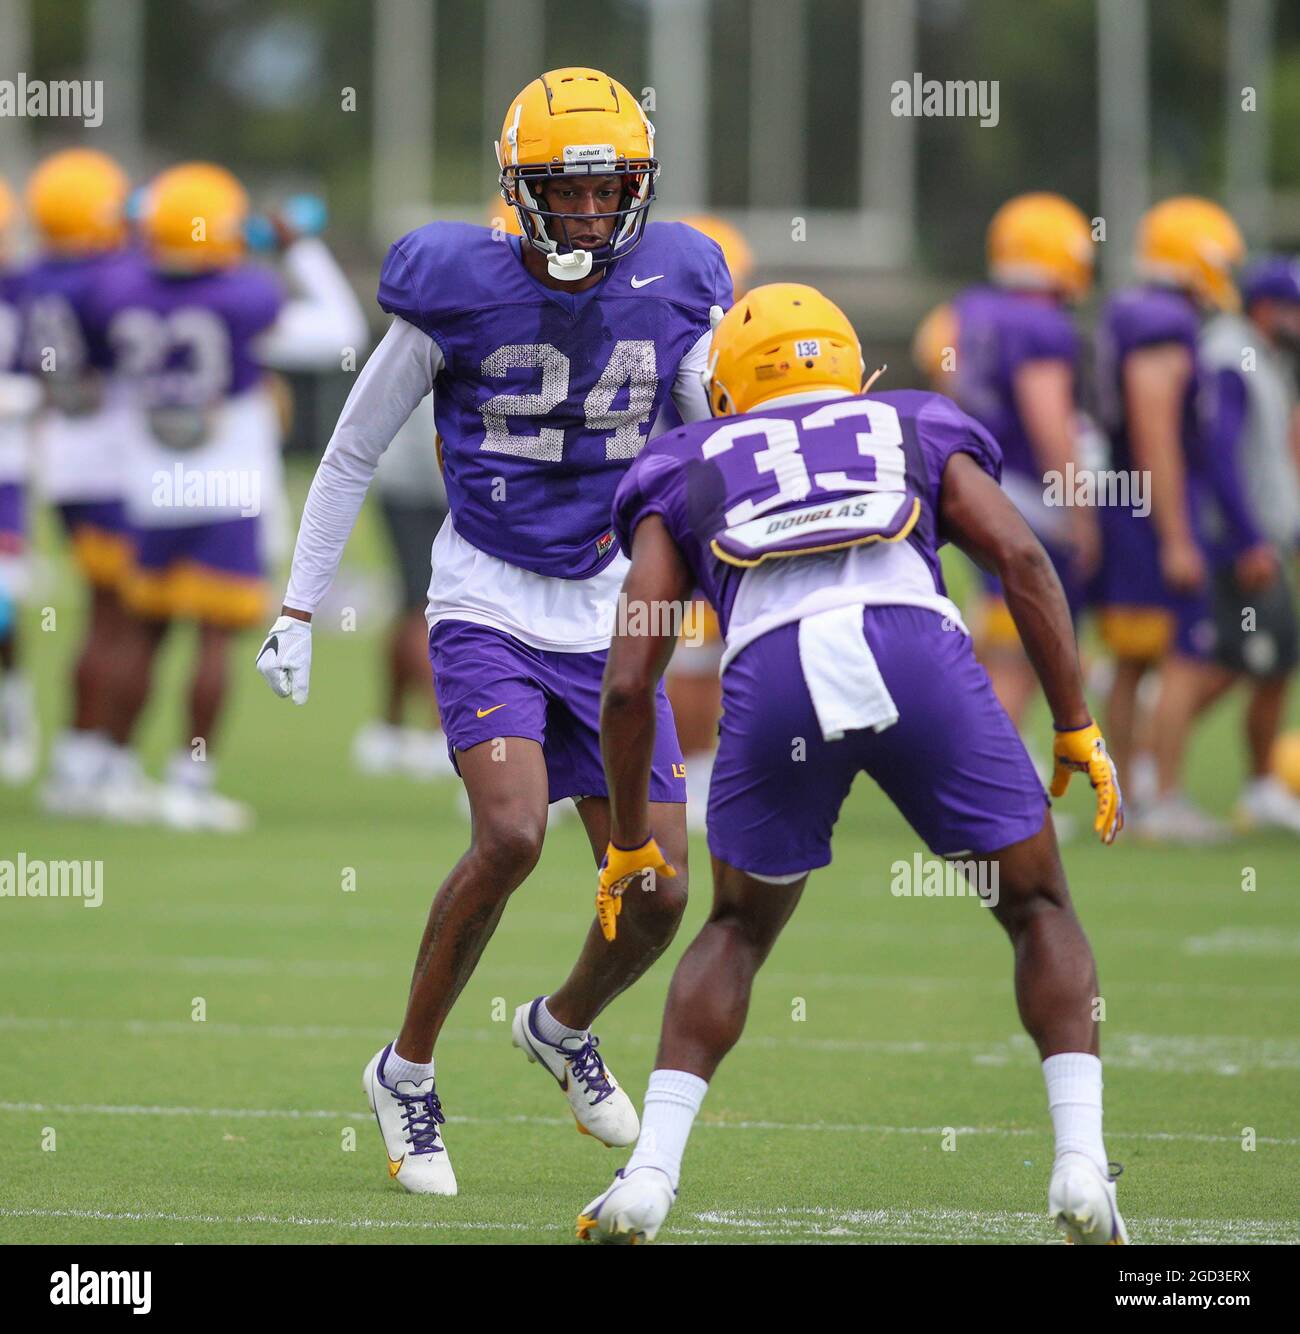 August 10, 2021: LSU defensive backs Darren Evans (24) and Lloyd Cole (33) run drills during the first week of fall football camp at the LSU Charles McClendon Practice Facility in Baton Rouge, LA. Jonathan Mailhes/CSM Stock Photo